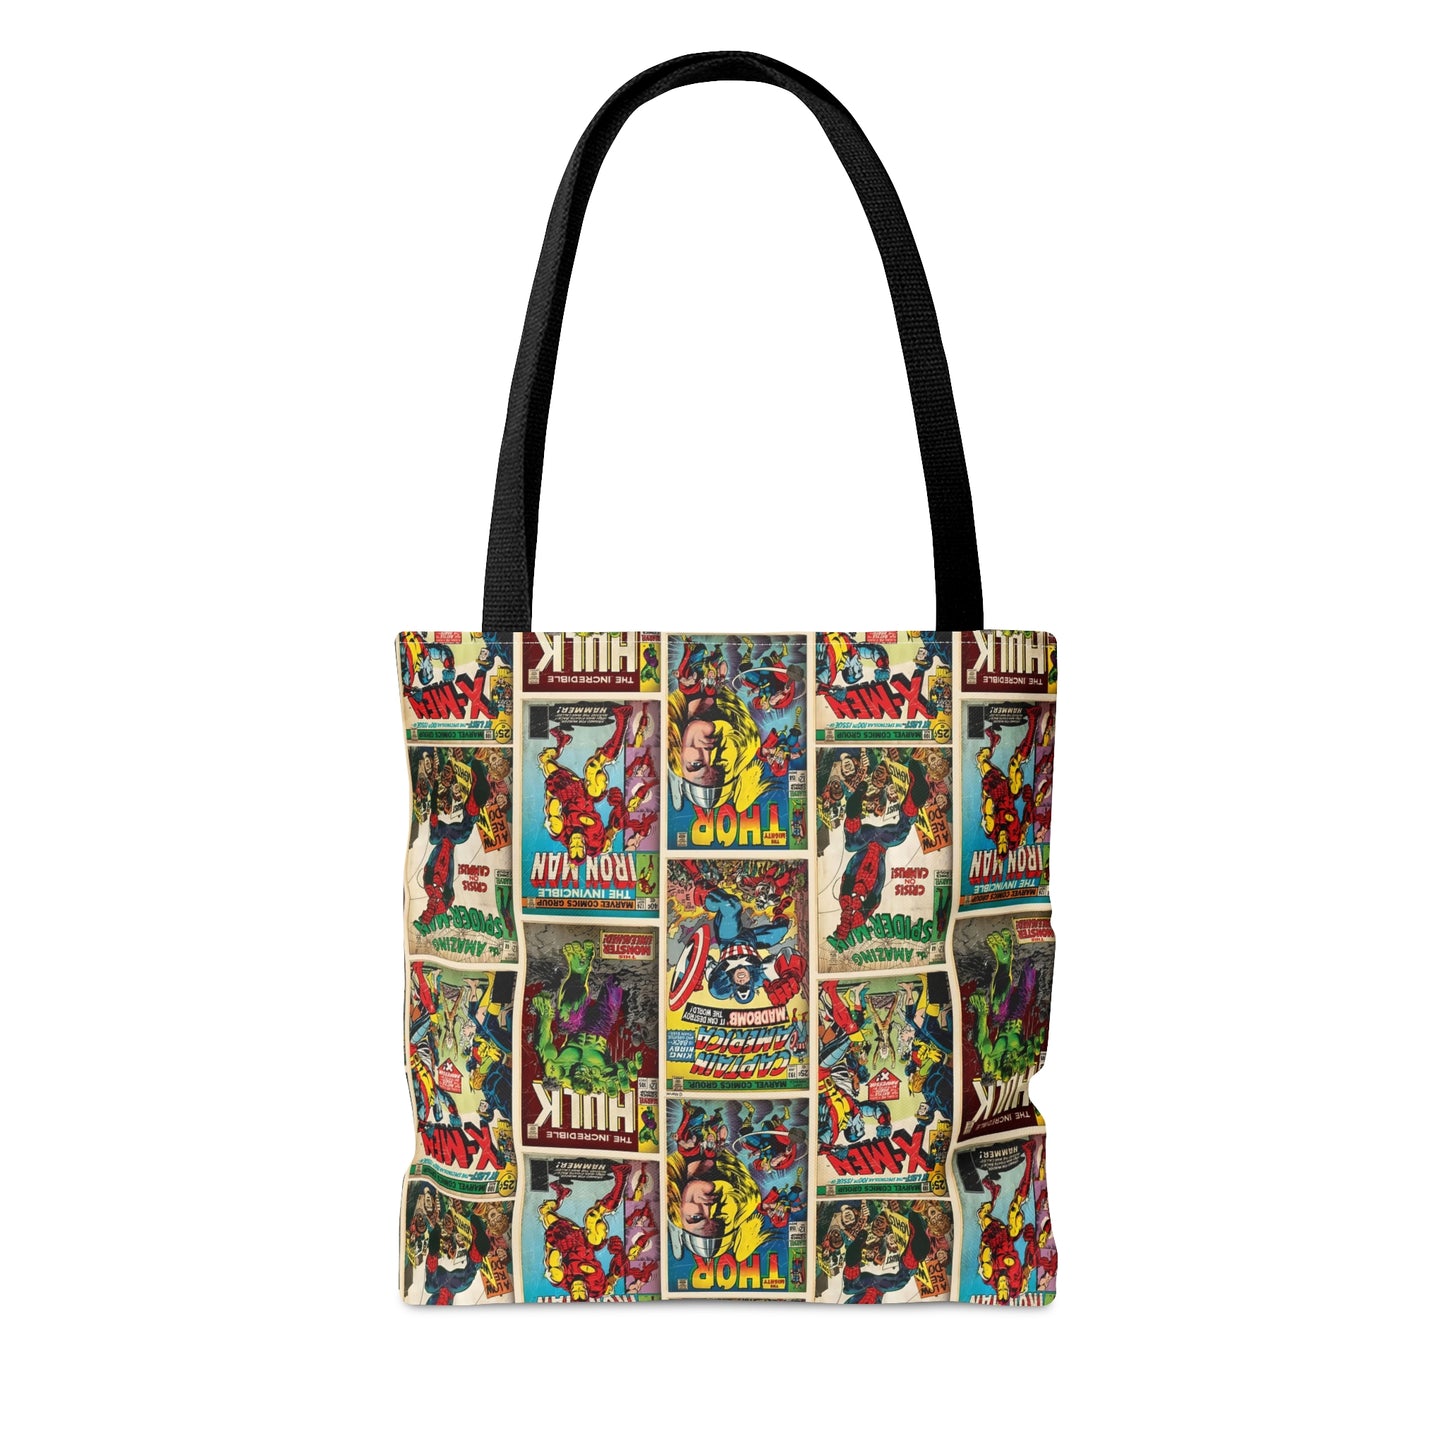 Marvel Comic Book Cover Collage Tote Bag